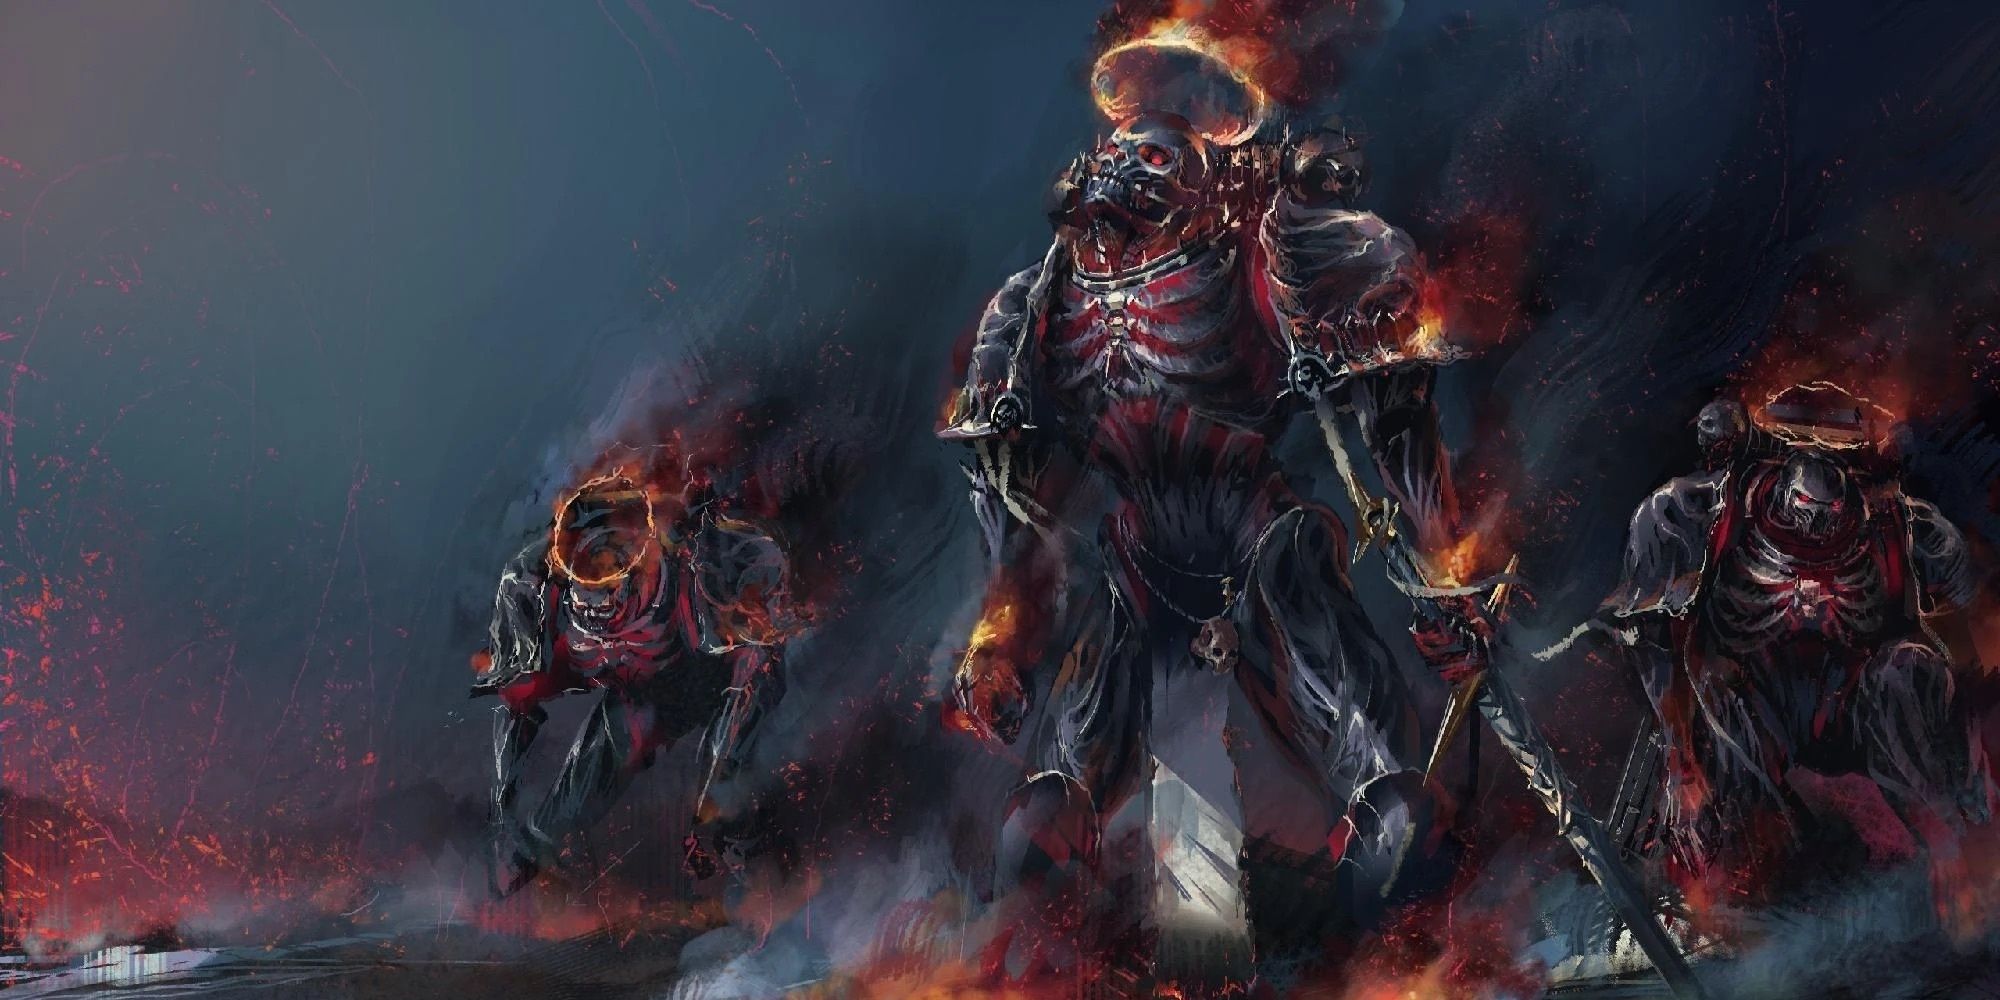 Three Legionaries materialize onto the battlefield, wreathed in flame and clad in black armor 